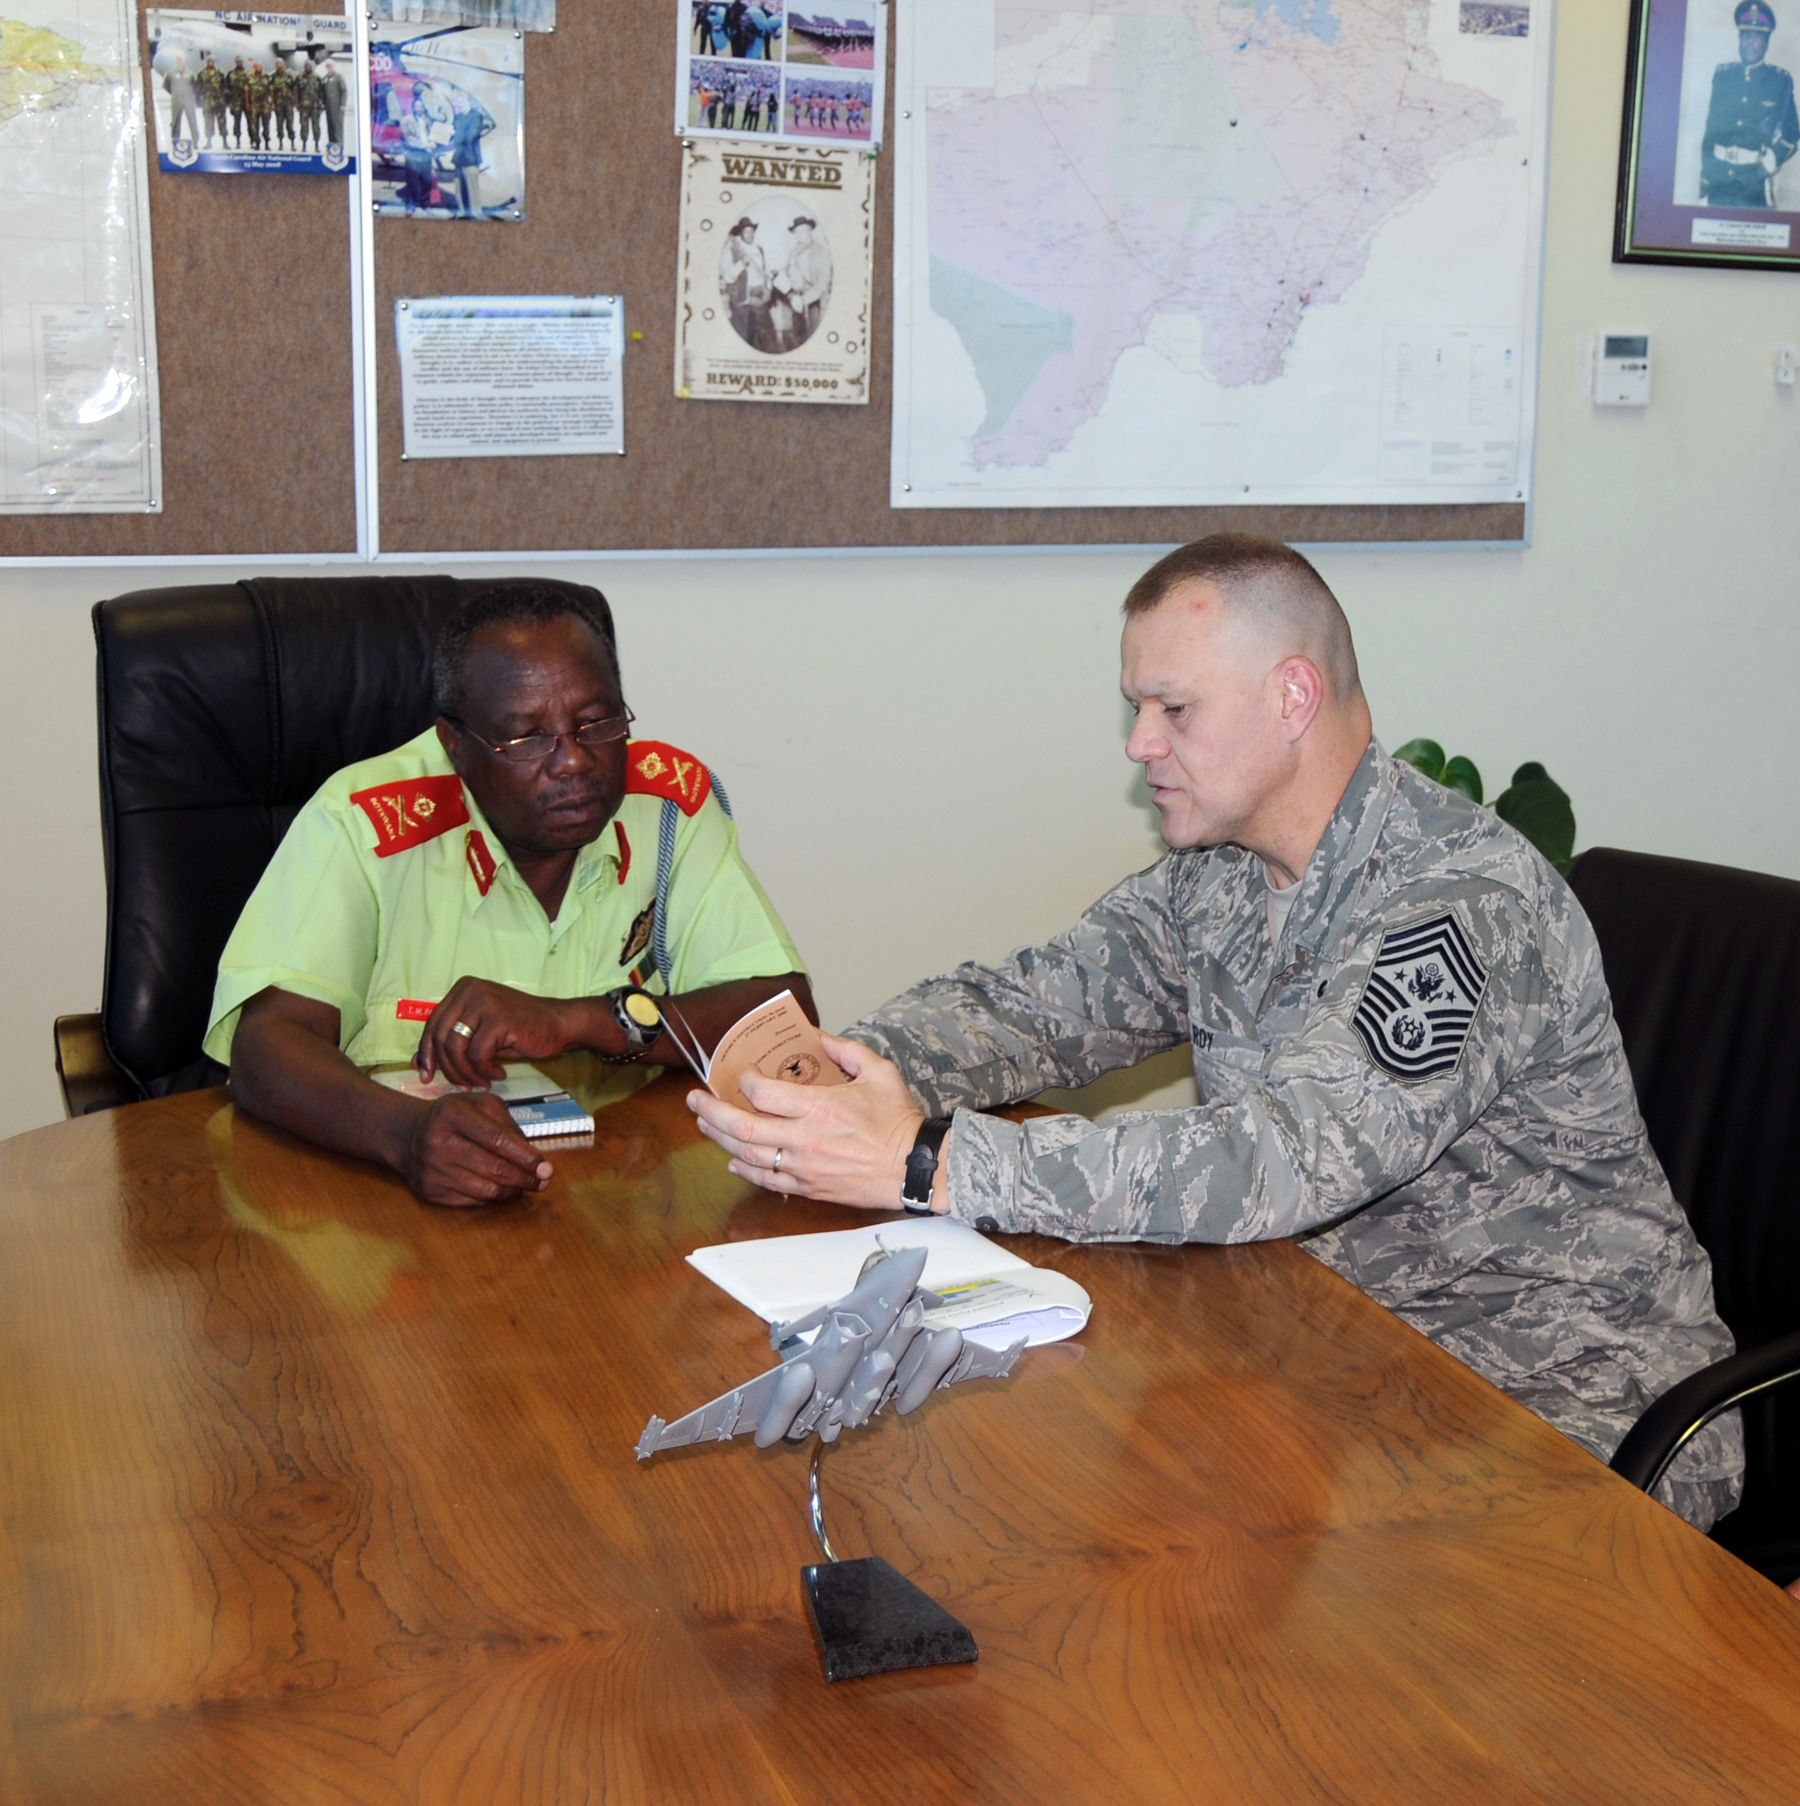 Cmsaf Visits Botswana Shares View On Deliberate Development Air Force Article Display